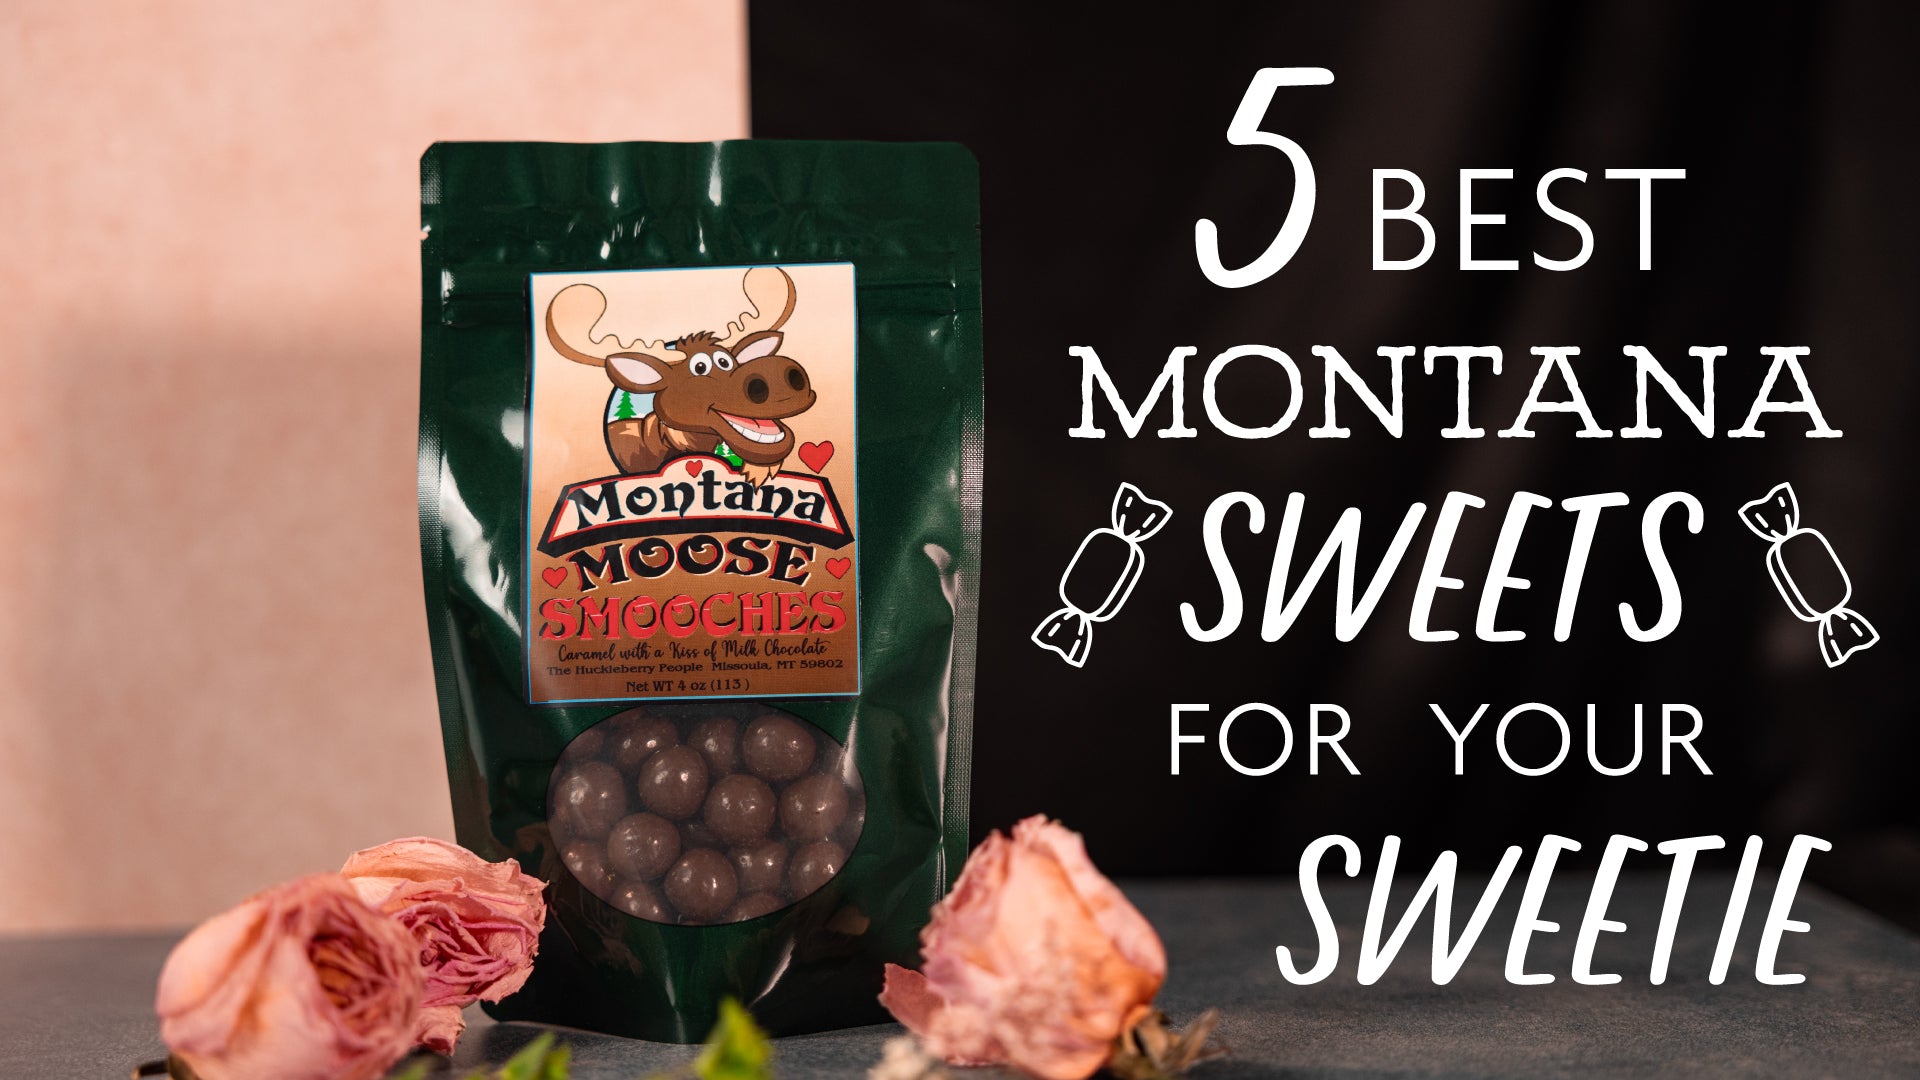 5 Best Montana Sweets for your Sweetie!